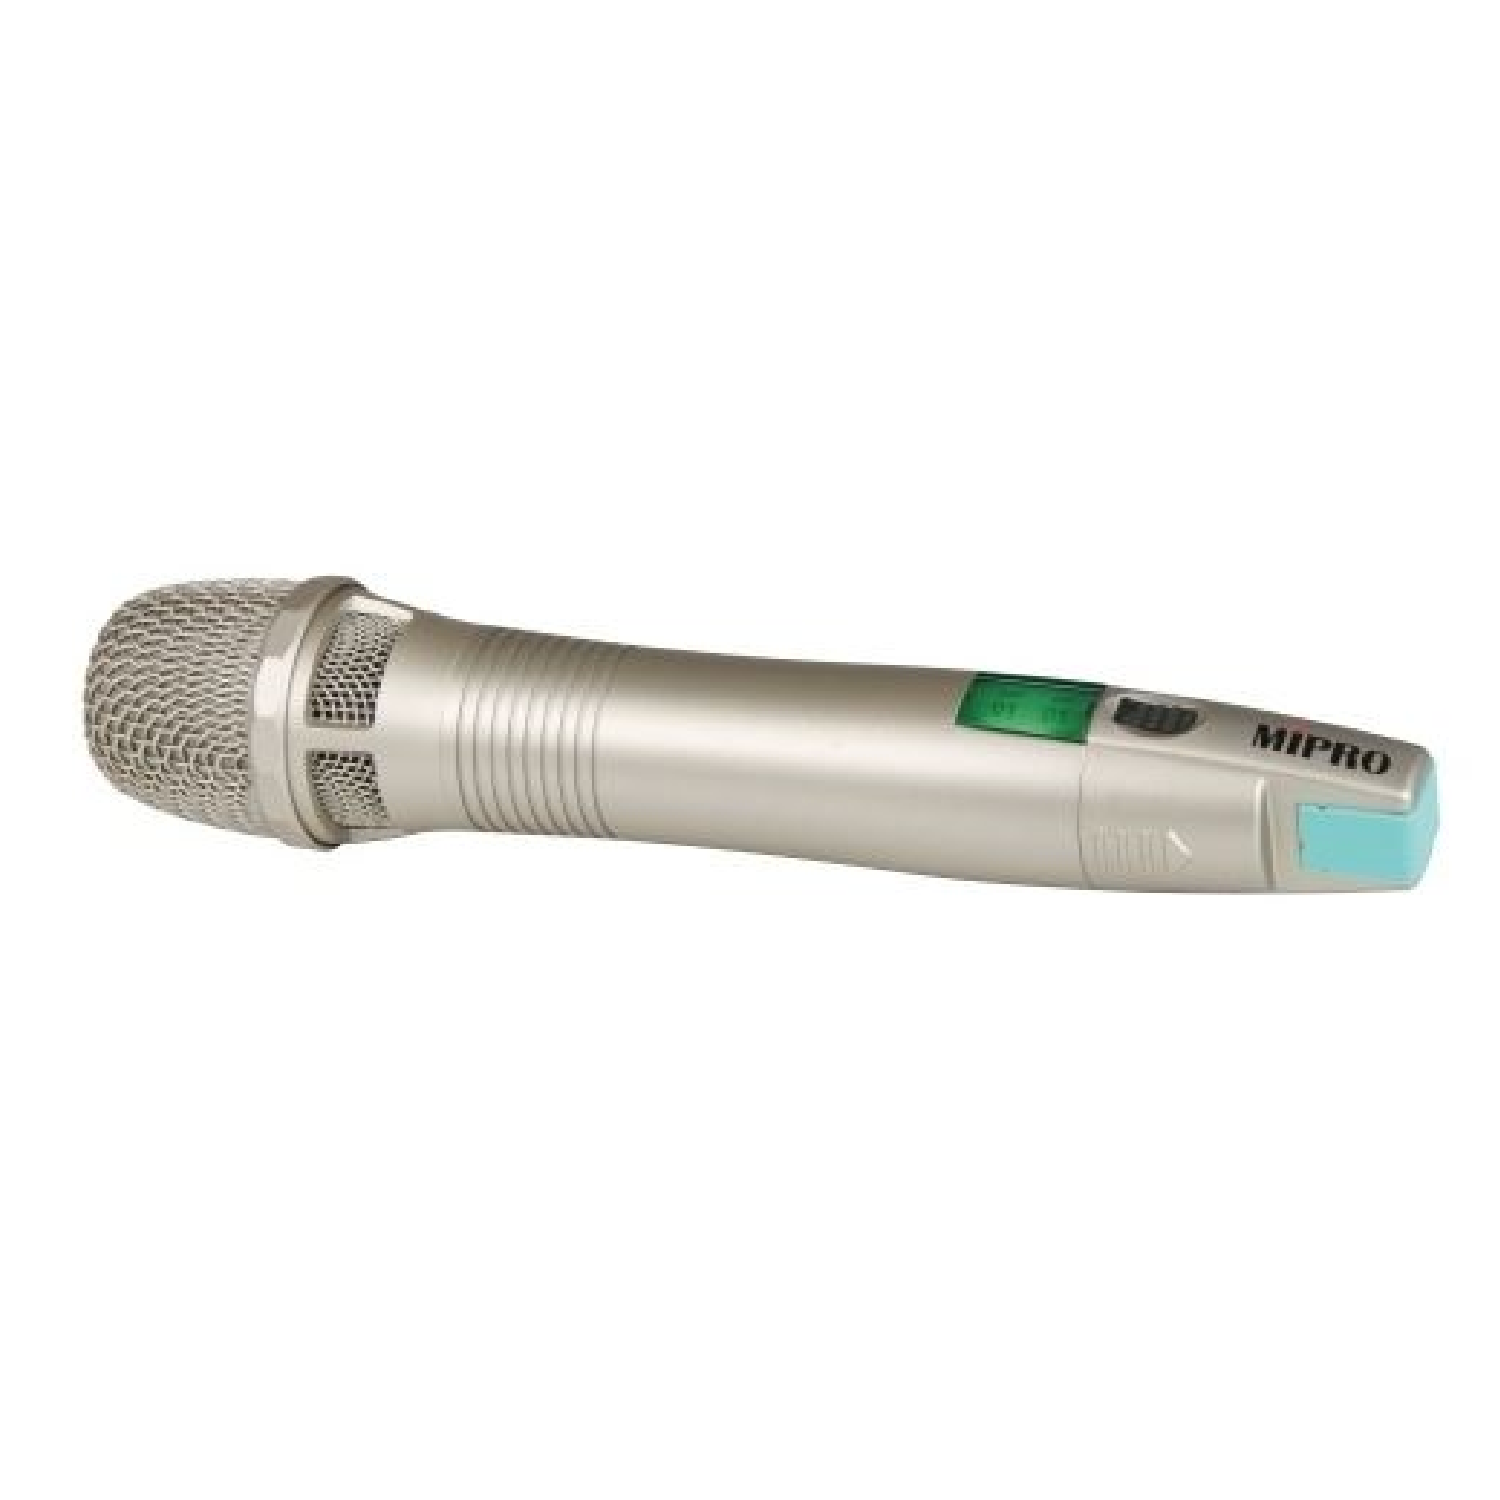 Rechargeable Wideband Digital Handheld Transmitter with Condenser Mic Capsule. (64MHz,Metal Housing, LCD, Mute Button,w/ one 18500 Lithium Battery)   ACT 80HC mipro